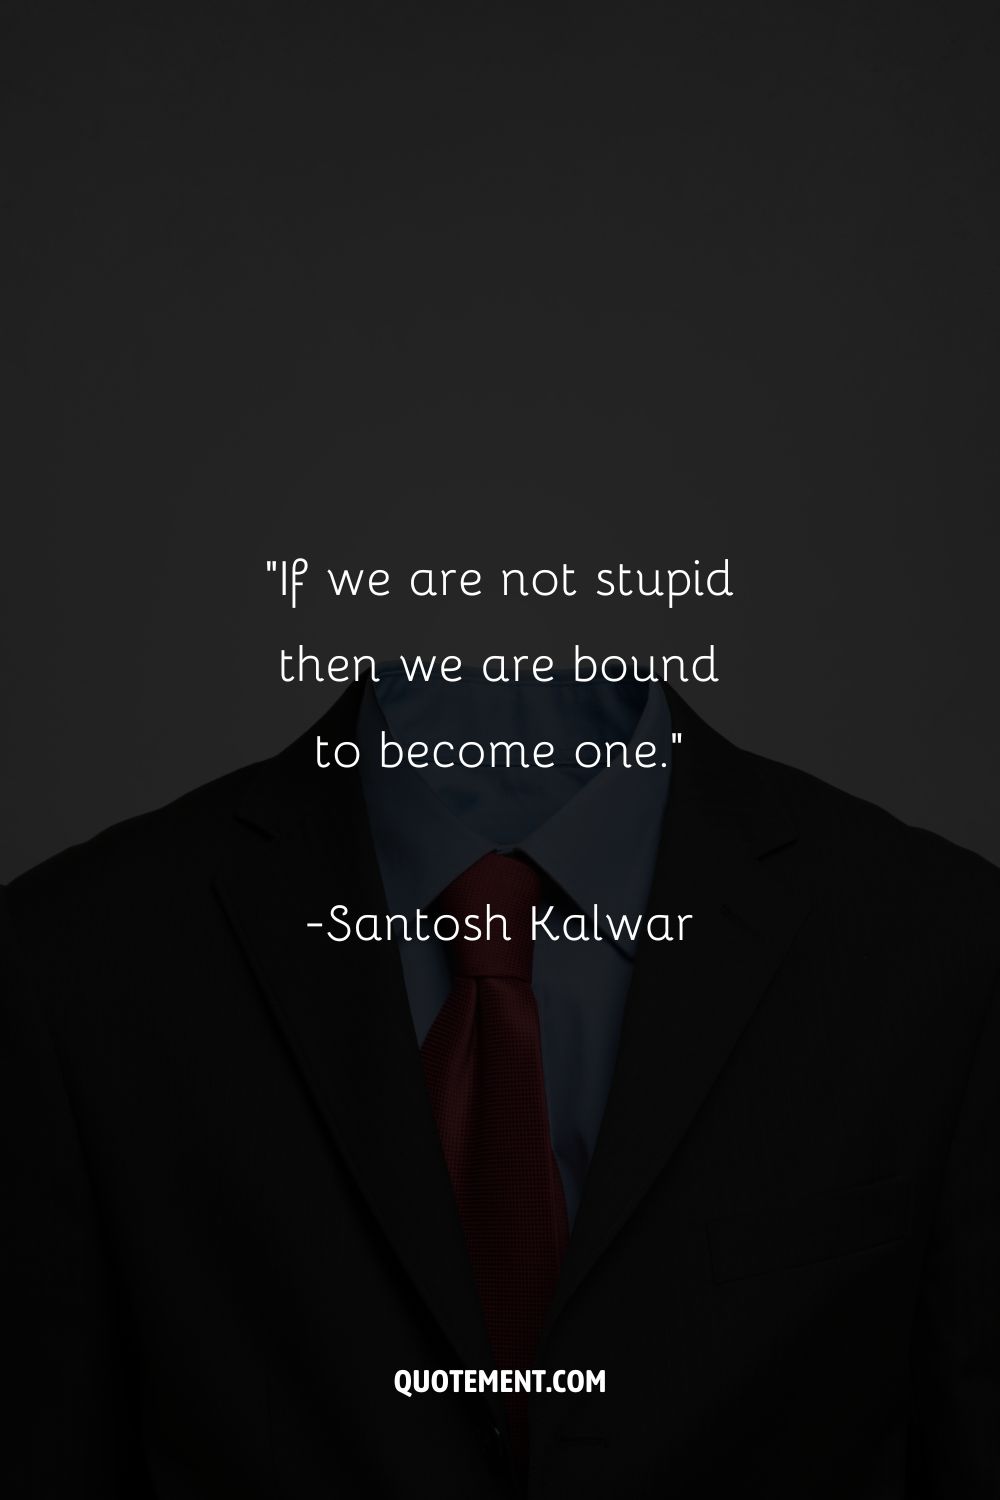 “If we are not stupid then we are bound to become one.”